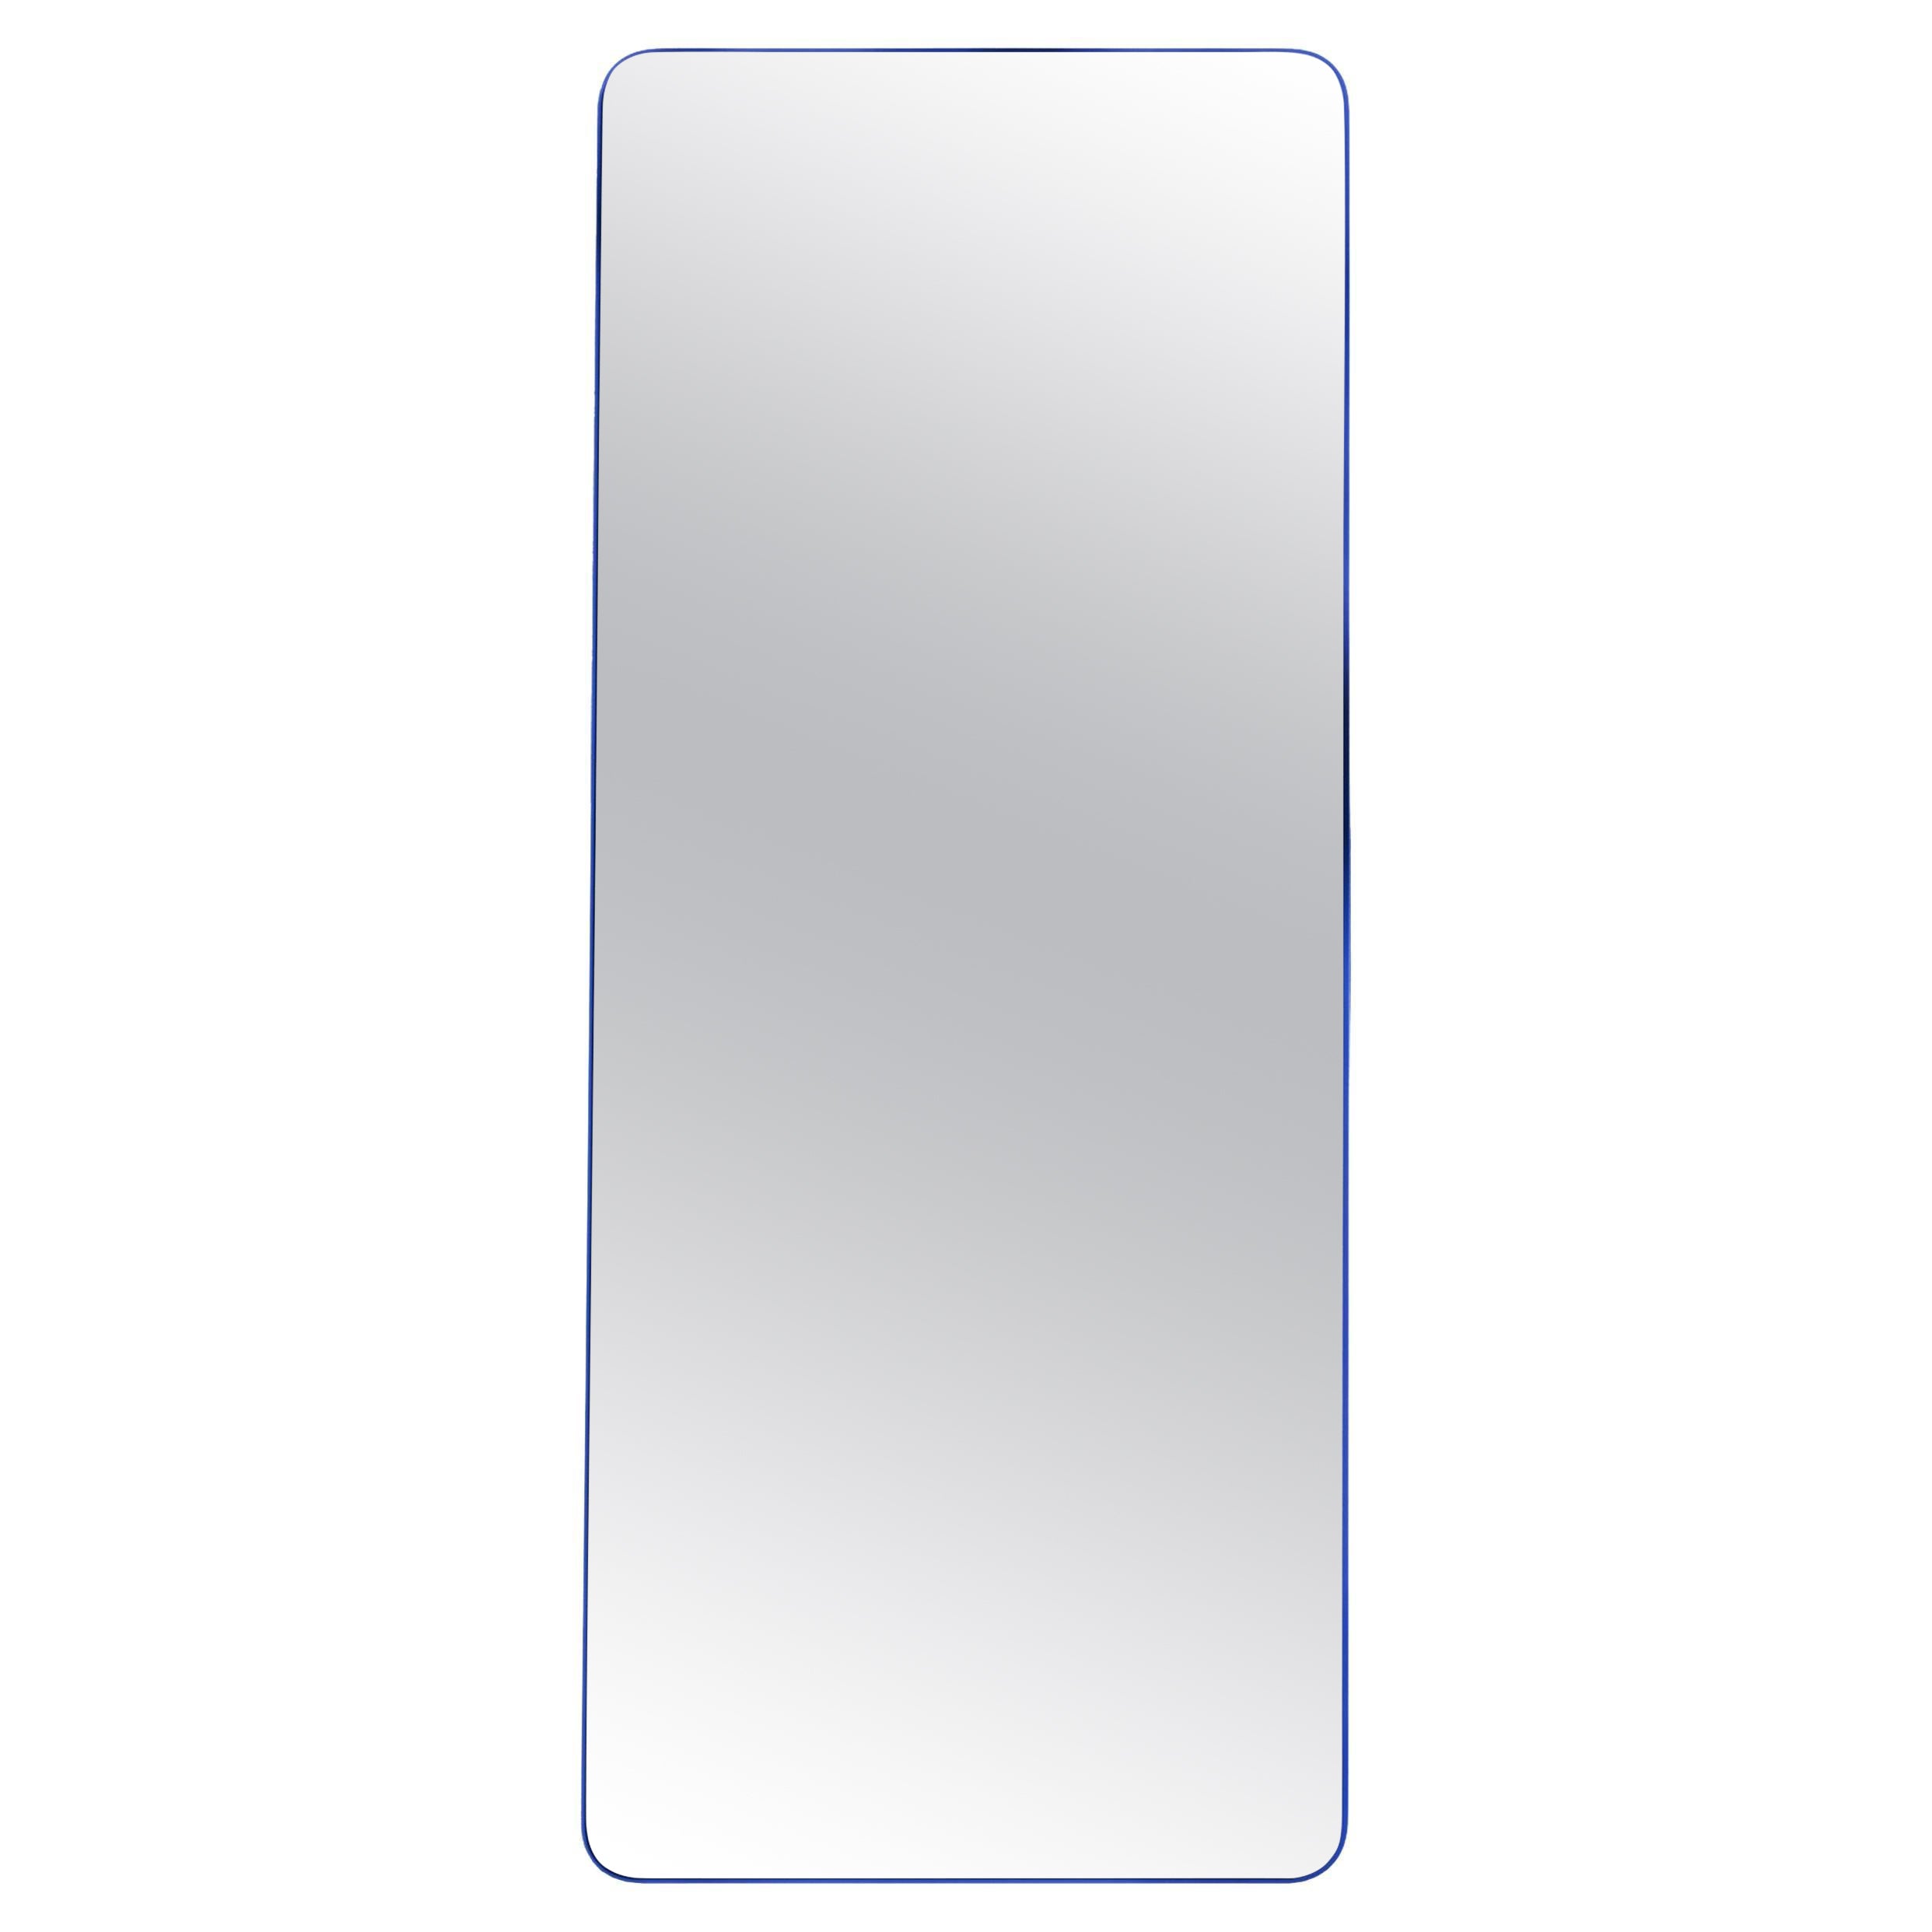 Contemporary Mirror 'Loveself 05' by Oitoproducts, Blue Frame For Sale